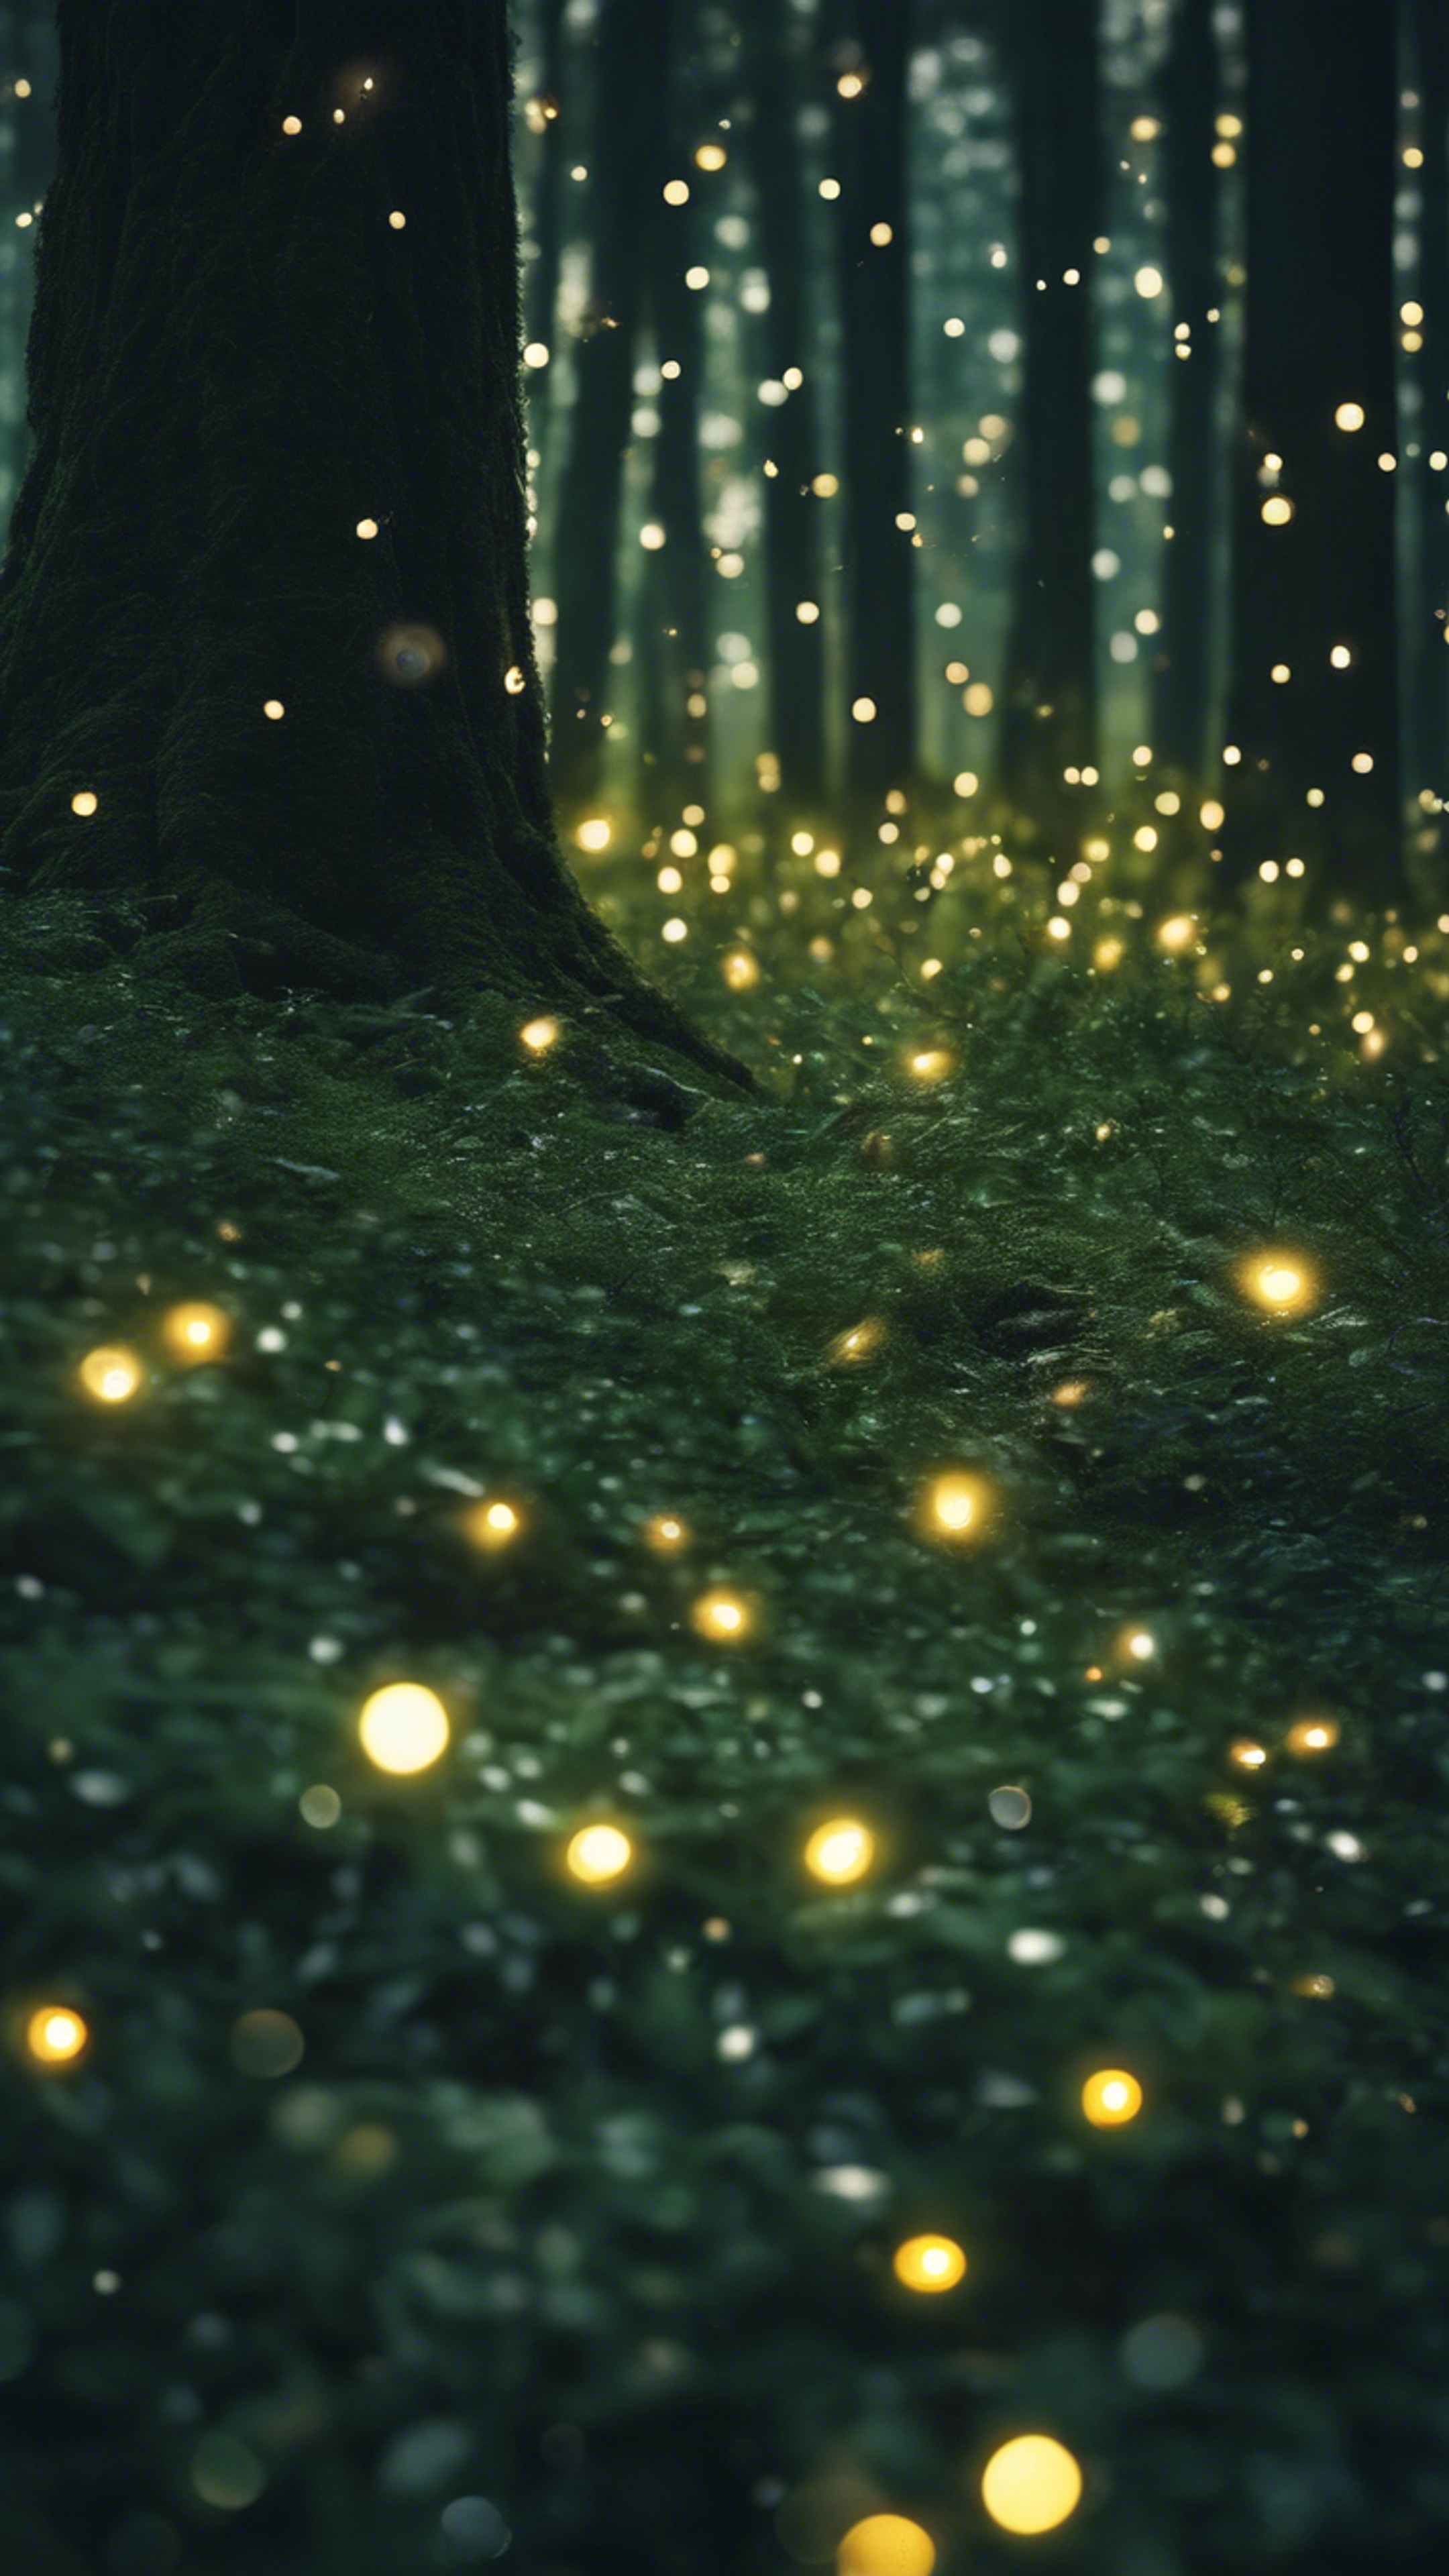 A dark green forest in the twilights, flecked with shimmering fireflies.壁紙[48f2b28e2b5742fcbebf]